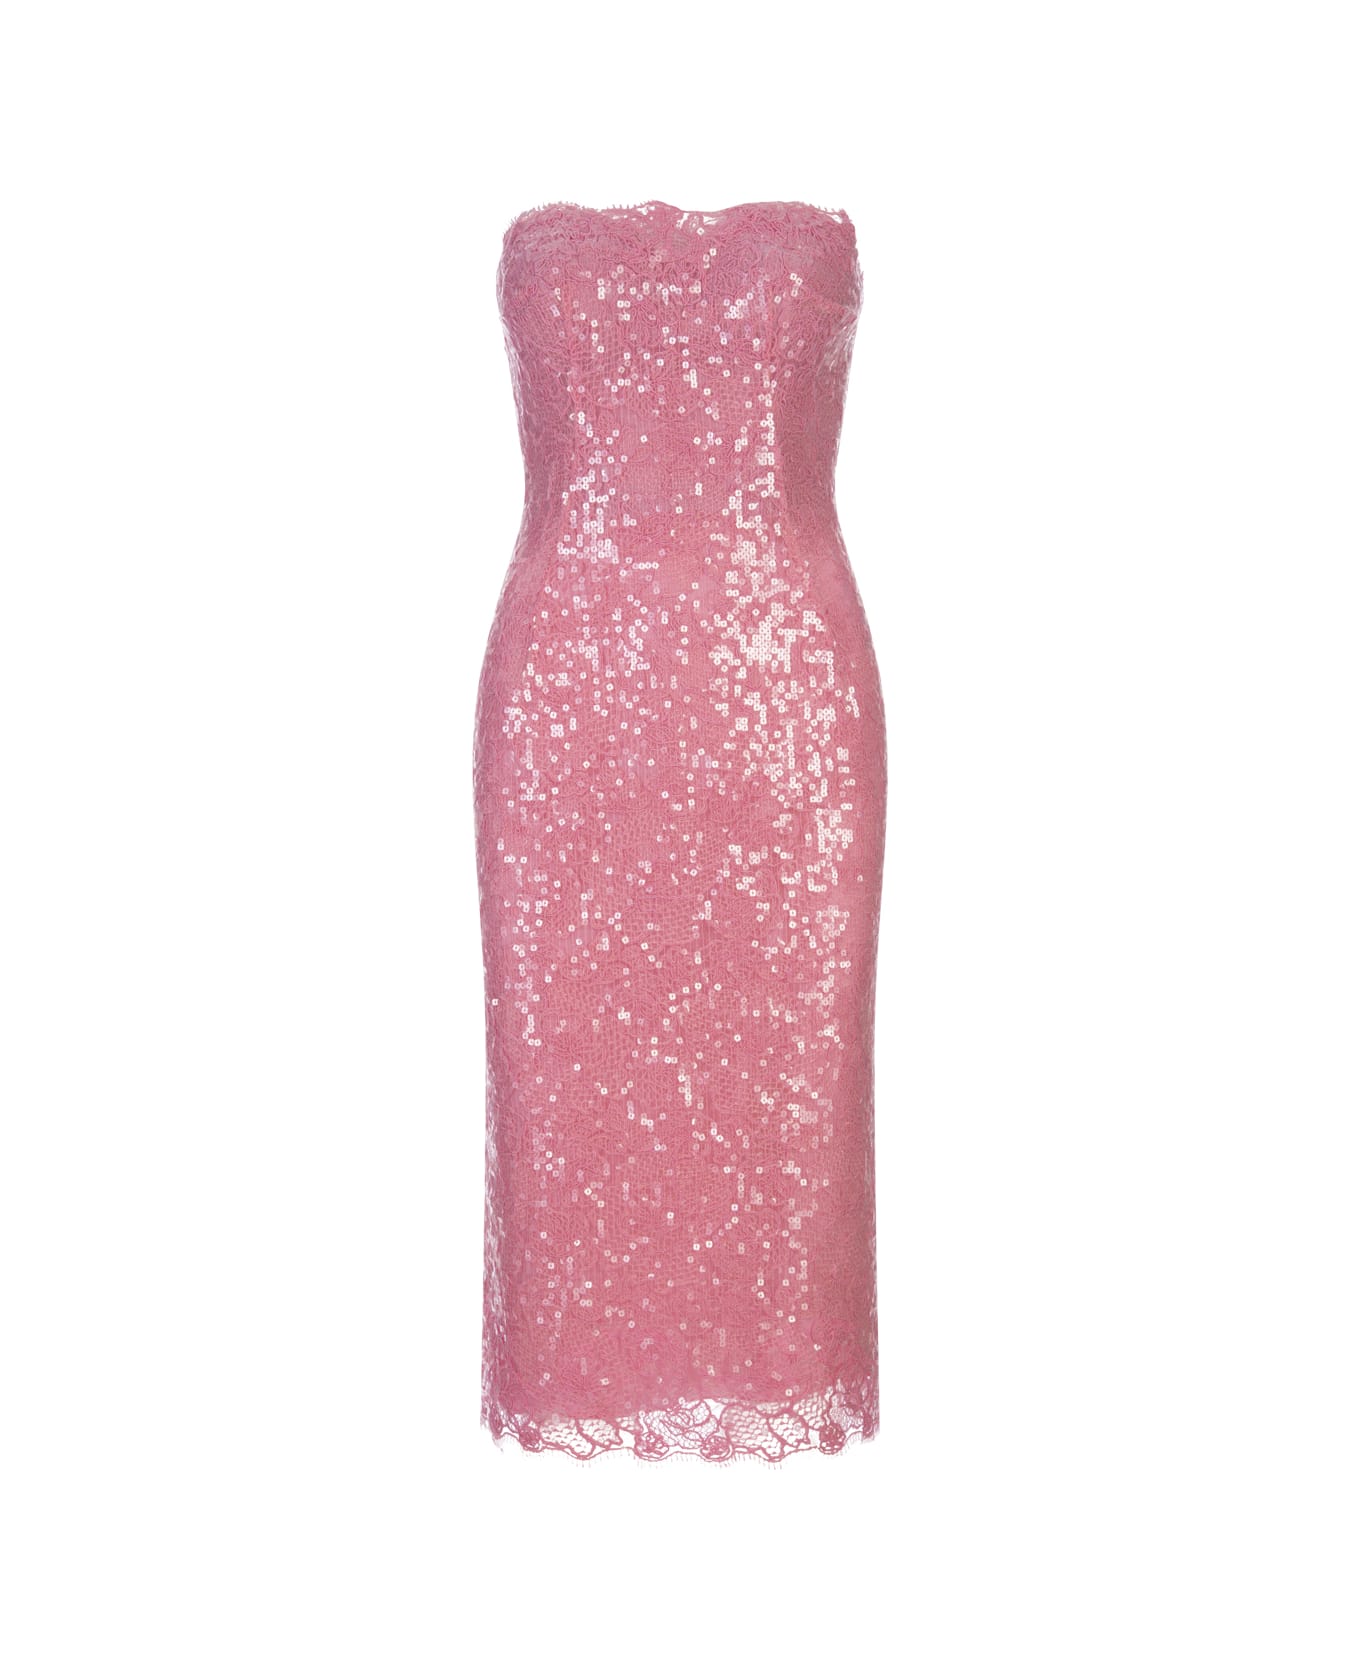 Ermanno Scervino Pink Lace Midi Dress With Crystals | italist, ALWAYS ...